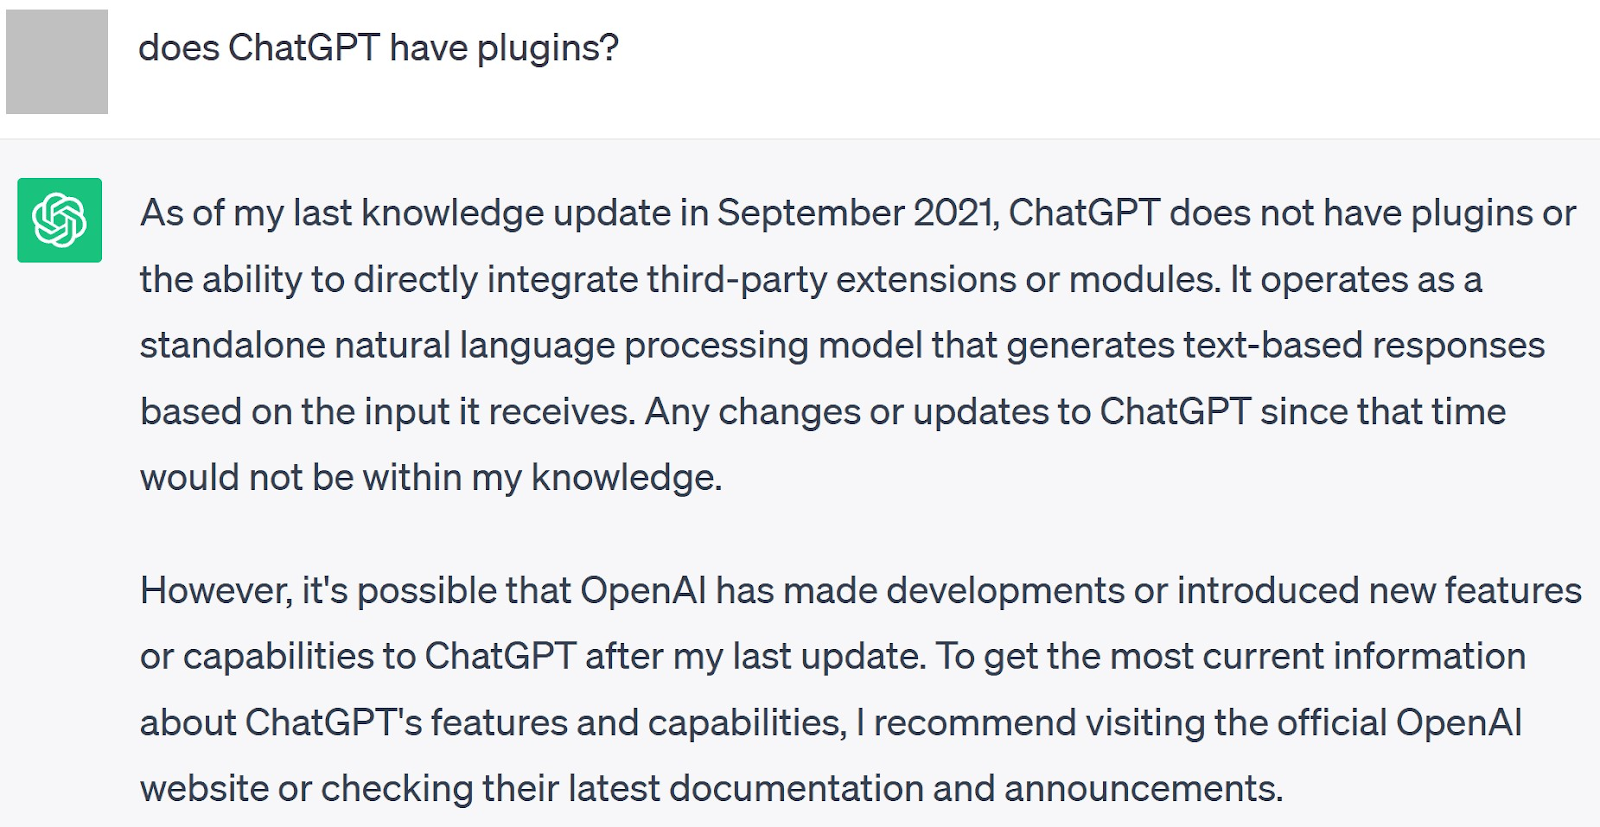 ChatGPT response to "does ChatGPT have plugins?"